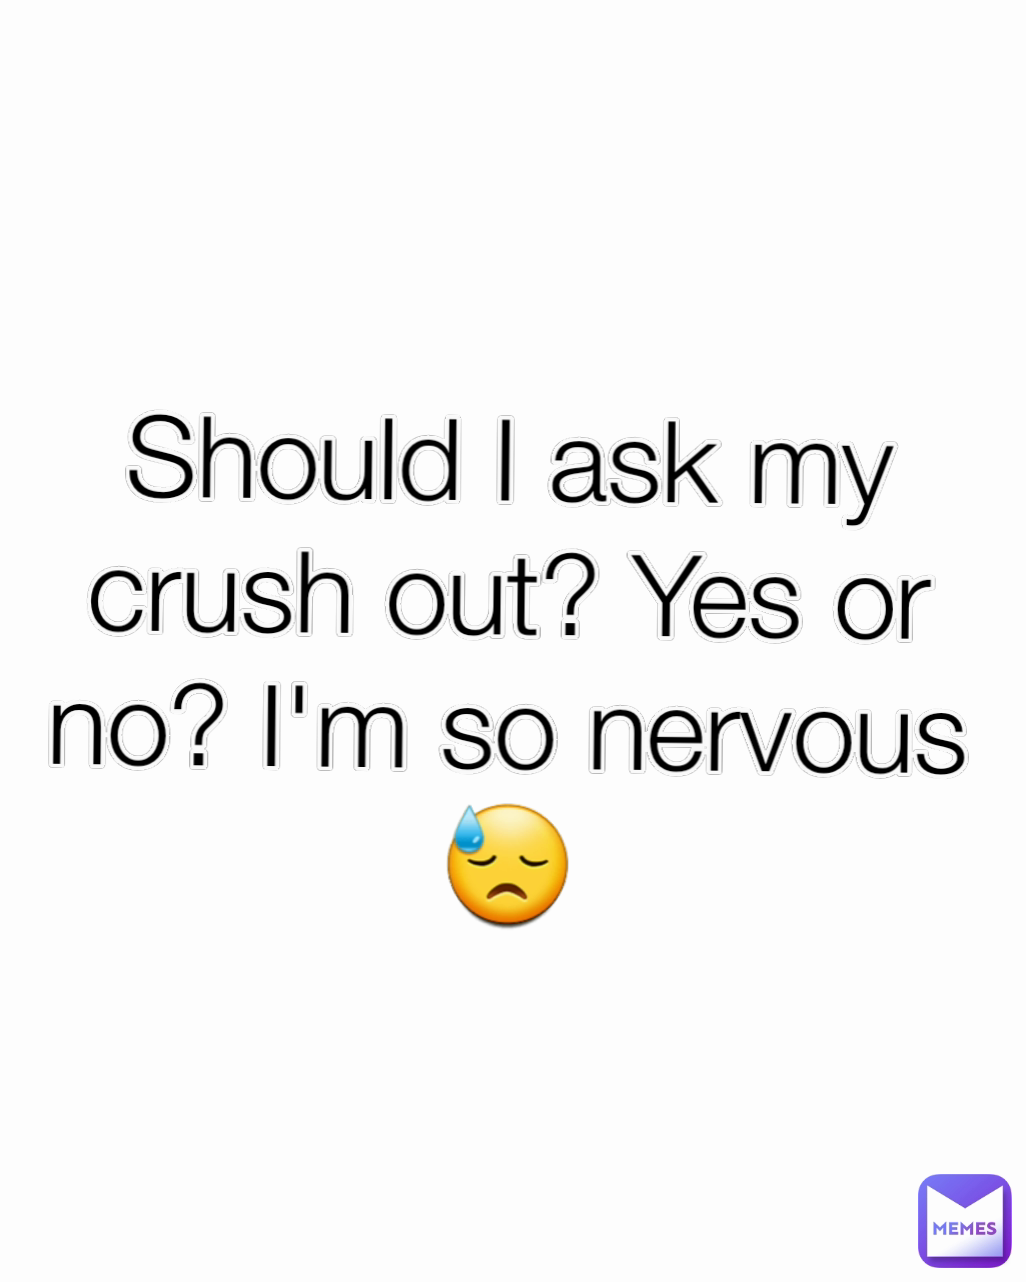 Should I ask my crush out? Yes or no? I'm so nervous 😓